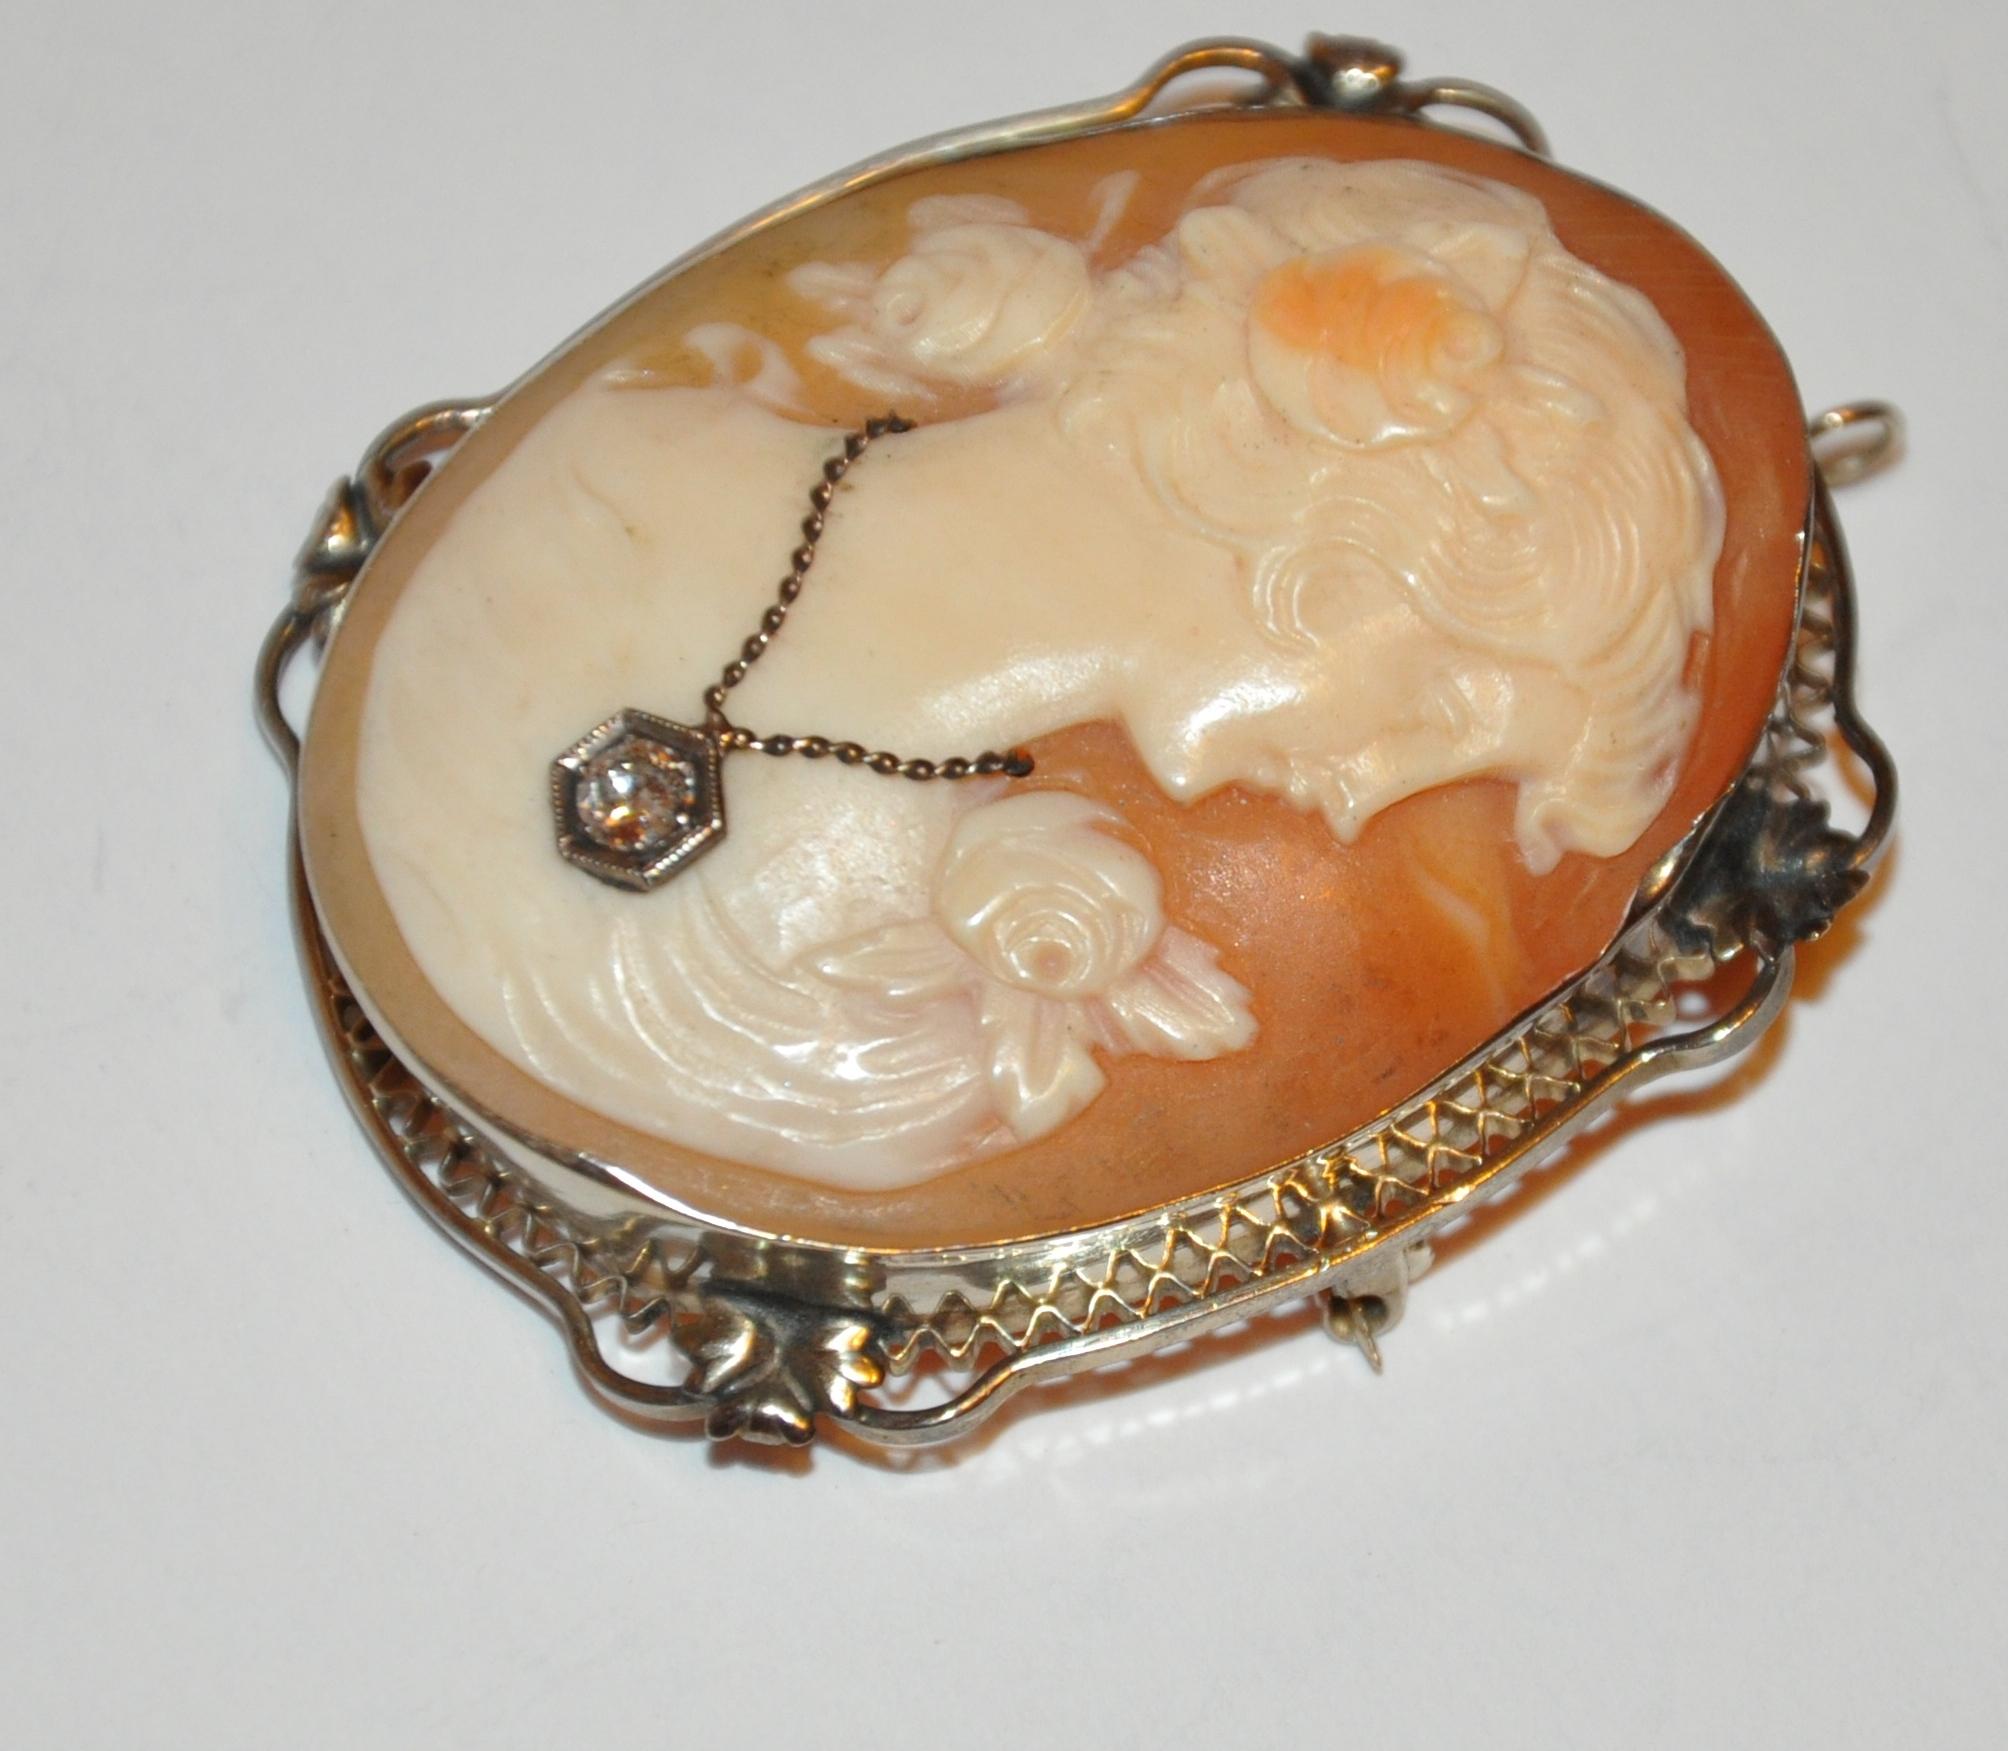        This exquisite Victorian Cameo surrounded with 14K yellow gold filigree is accented with a .10 carat diamond pendant delicately hanging on necklace within the cameo. This wonderful cameo can be worn either as a brooch or pendant if desired.